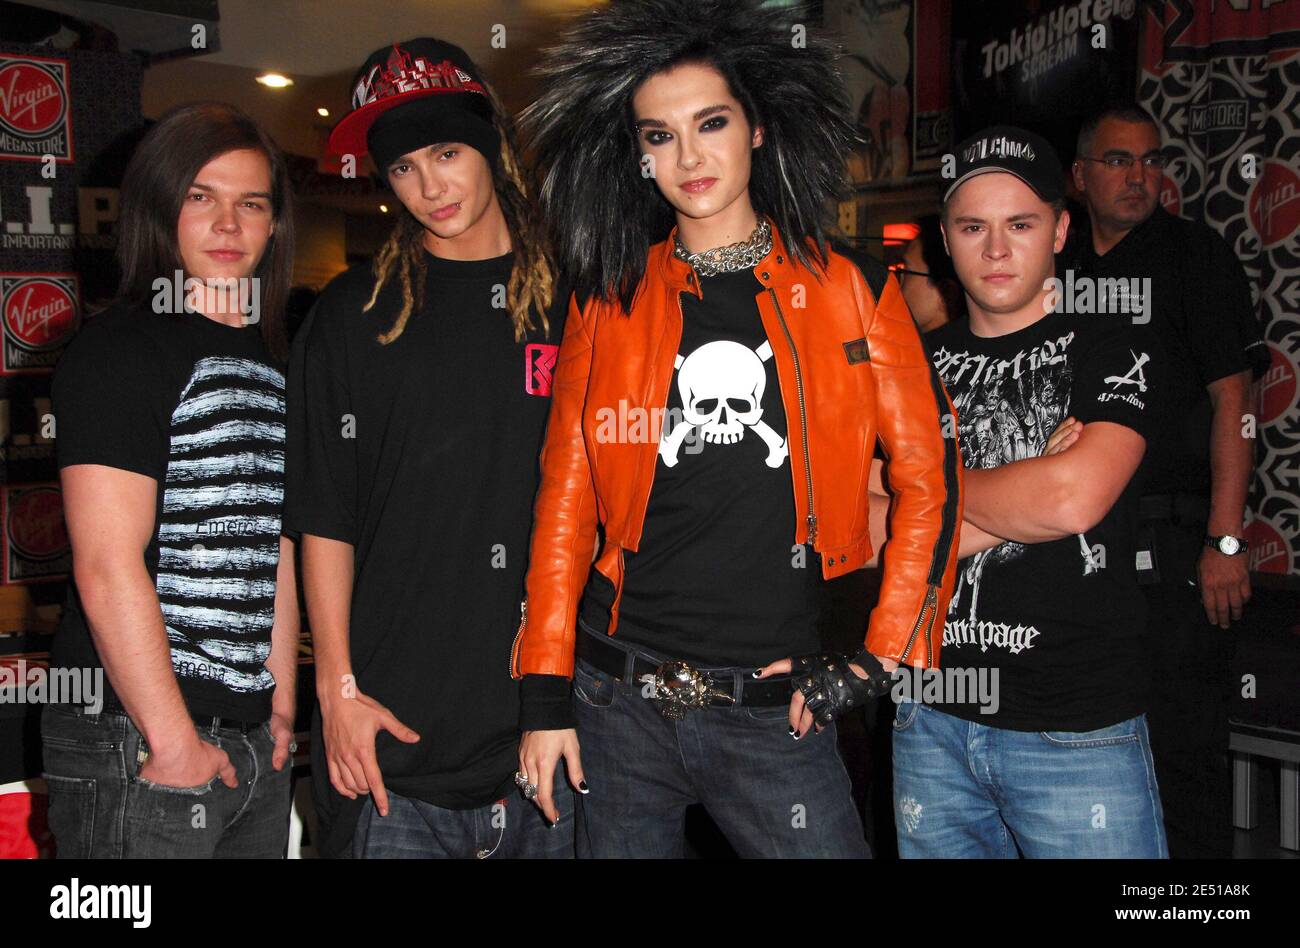 Musicians George Listing, Tom Kaultiz, Bill Kaultiz, and Gustav Schaefer of Tokio Hotel pose for pictures after performing at Virgin Megastore at Times Square in New York City, NY, USA on May 6, 2008. Photo by Gregorio Binuya/ABACAPRESS.COM Stock Photo